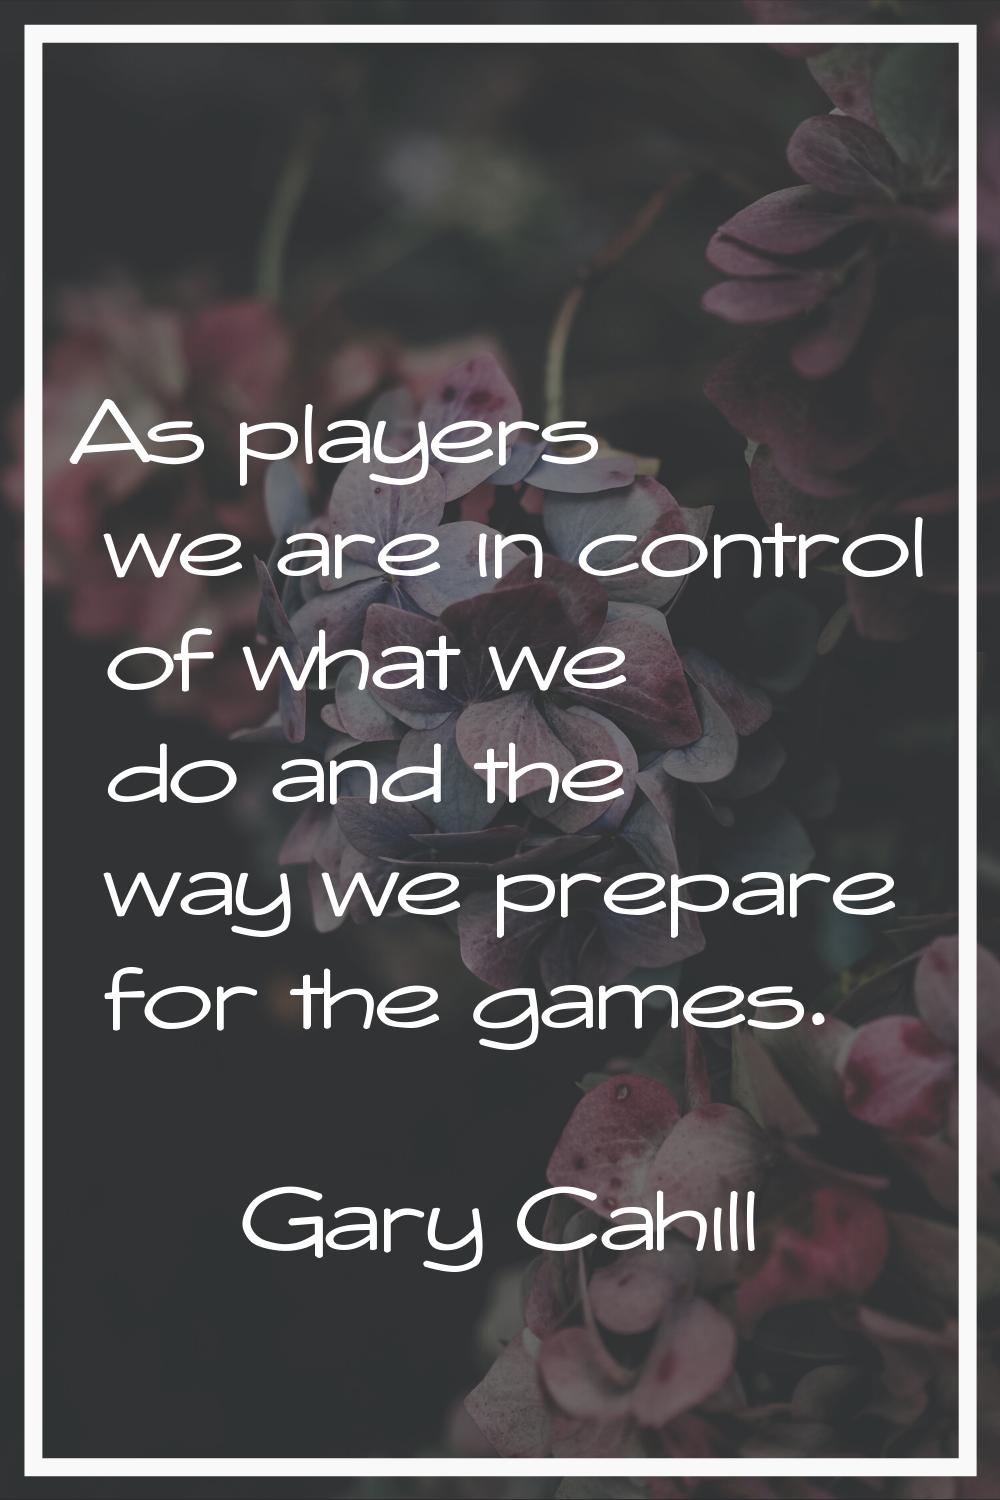 As players we are in control of what we do and the way we prepare for the games.